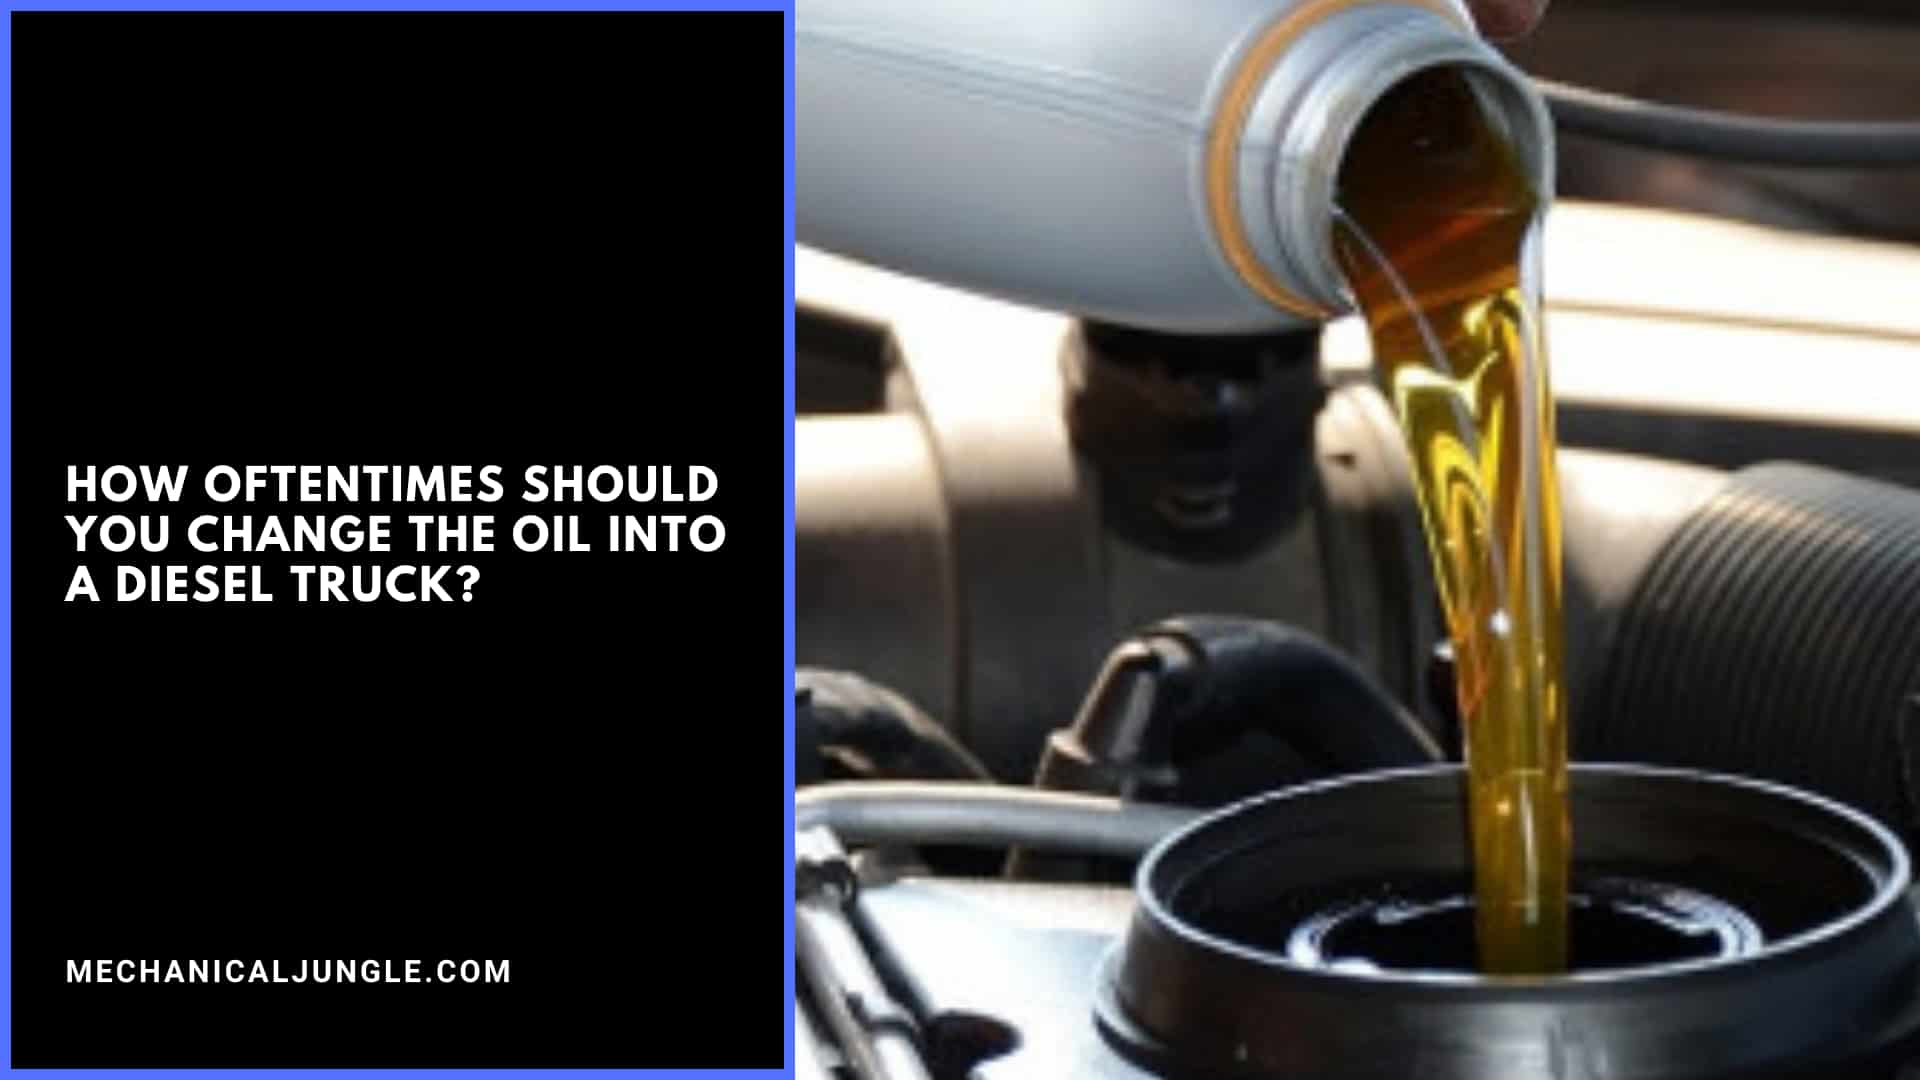 How Oftentimes Should You Change the Oil into a Diesel Truck?